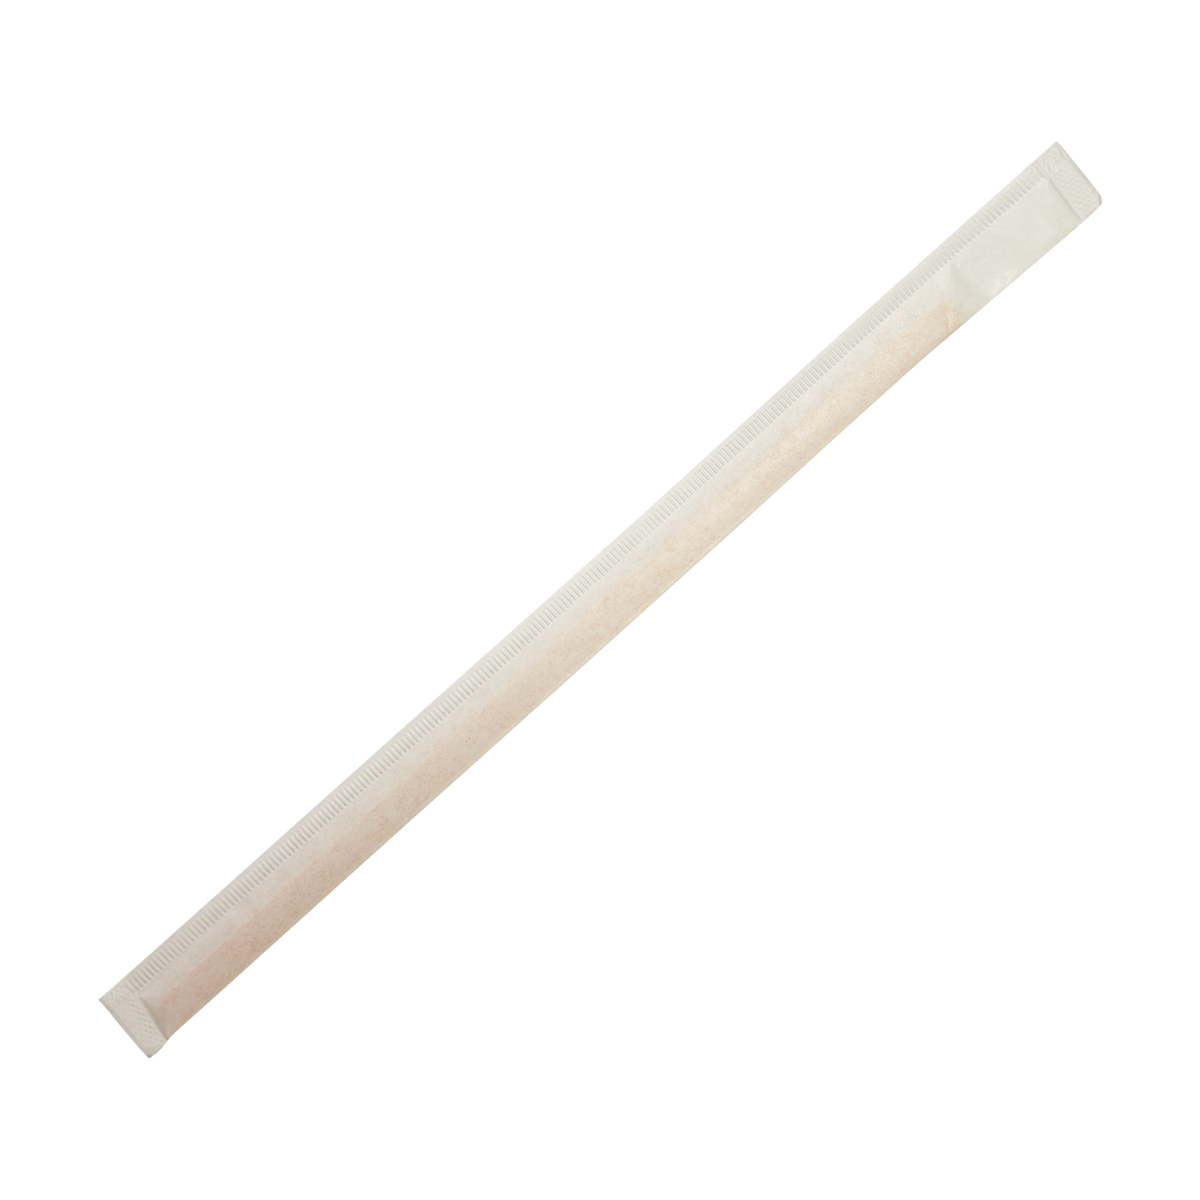 https://www.restaurantsupplydrops.shop/wp-content/uploads/1689/34/wrapped-wood-stirrers-karat-earth-7-5-wooden-stir-sticks-5000-ct-karat-is-now-available-to-purchase_1.png